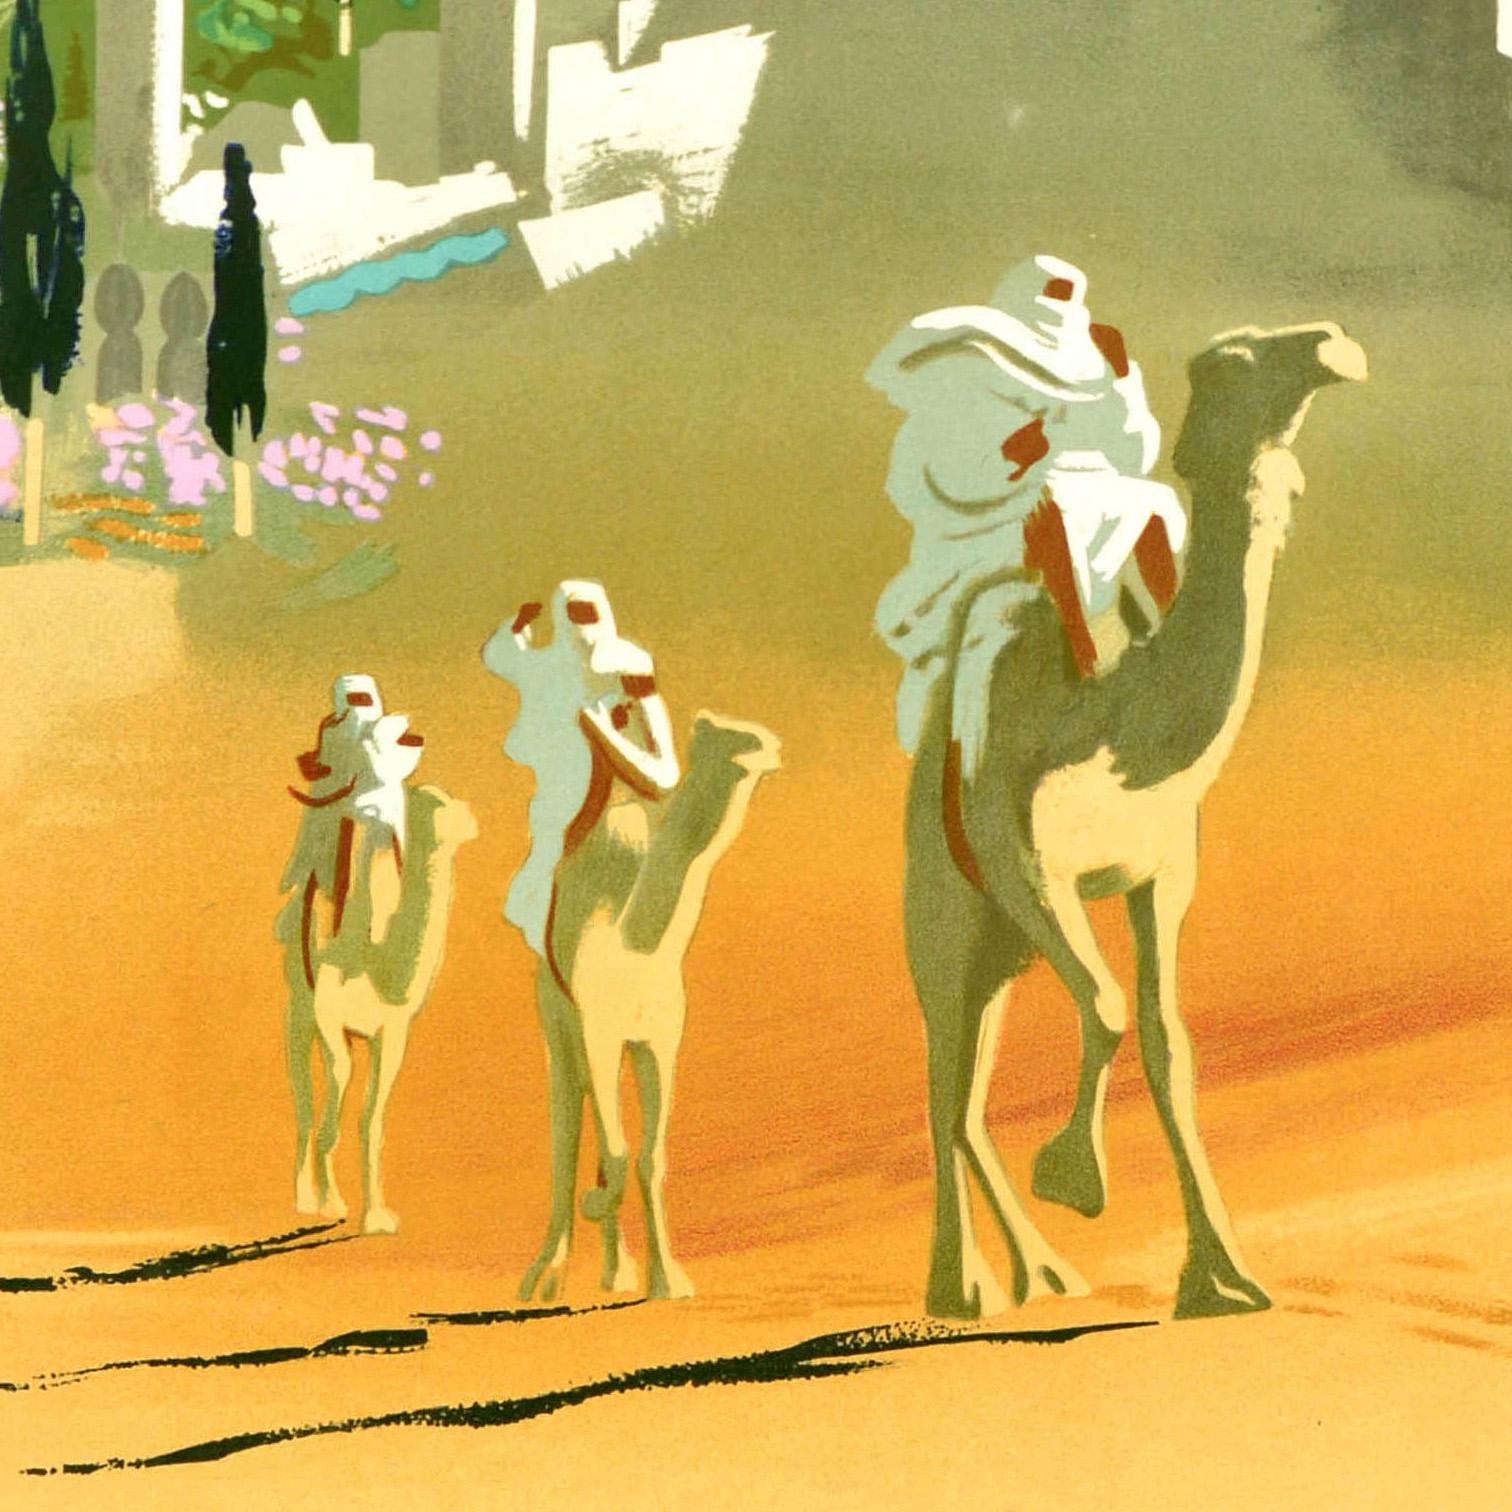 Original vintage travel poster for the Middle East / Proche Orient Air France (Near East) featuring a colourful illustration by the French artist Jean Even (1910-1986) depicting people in white clothing riding camels up a hill in the desert sand